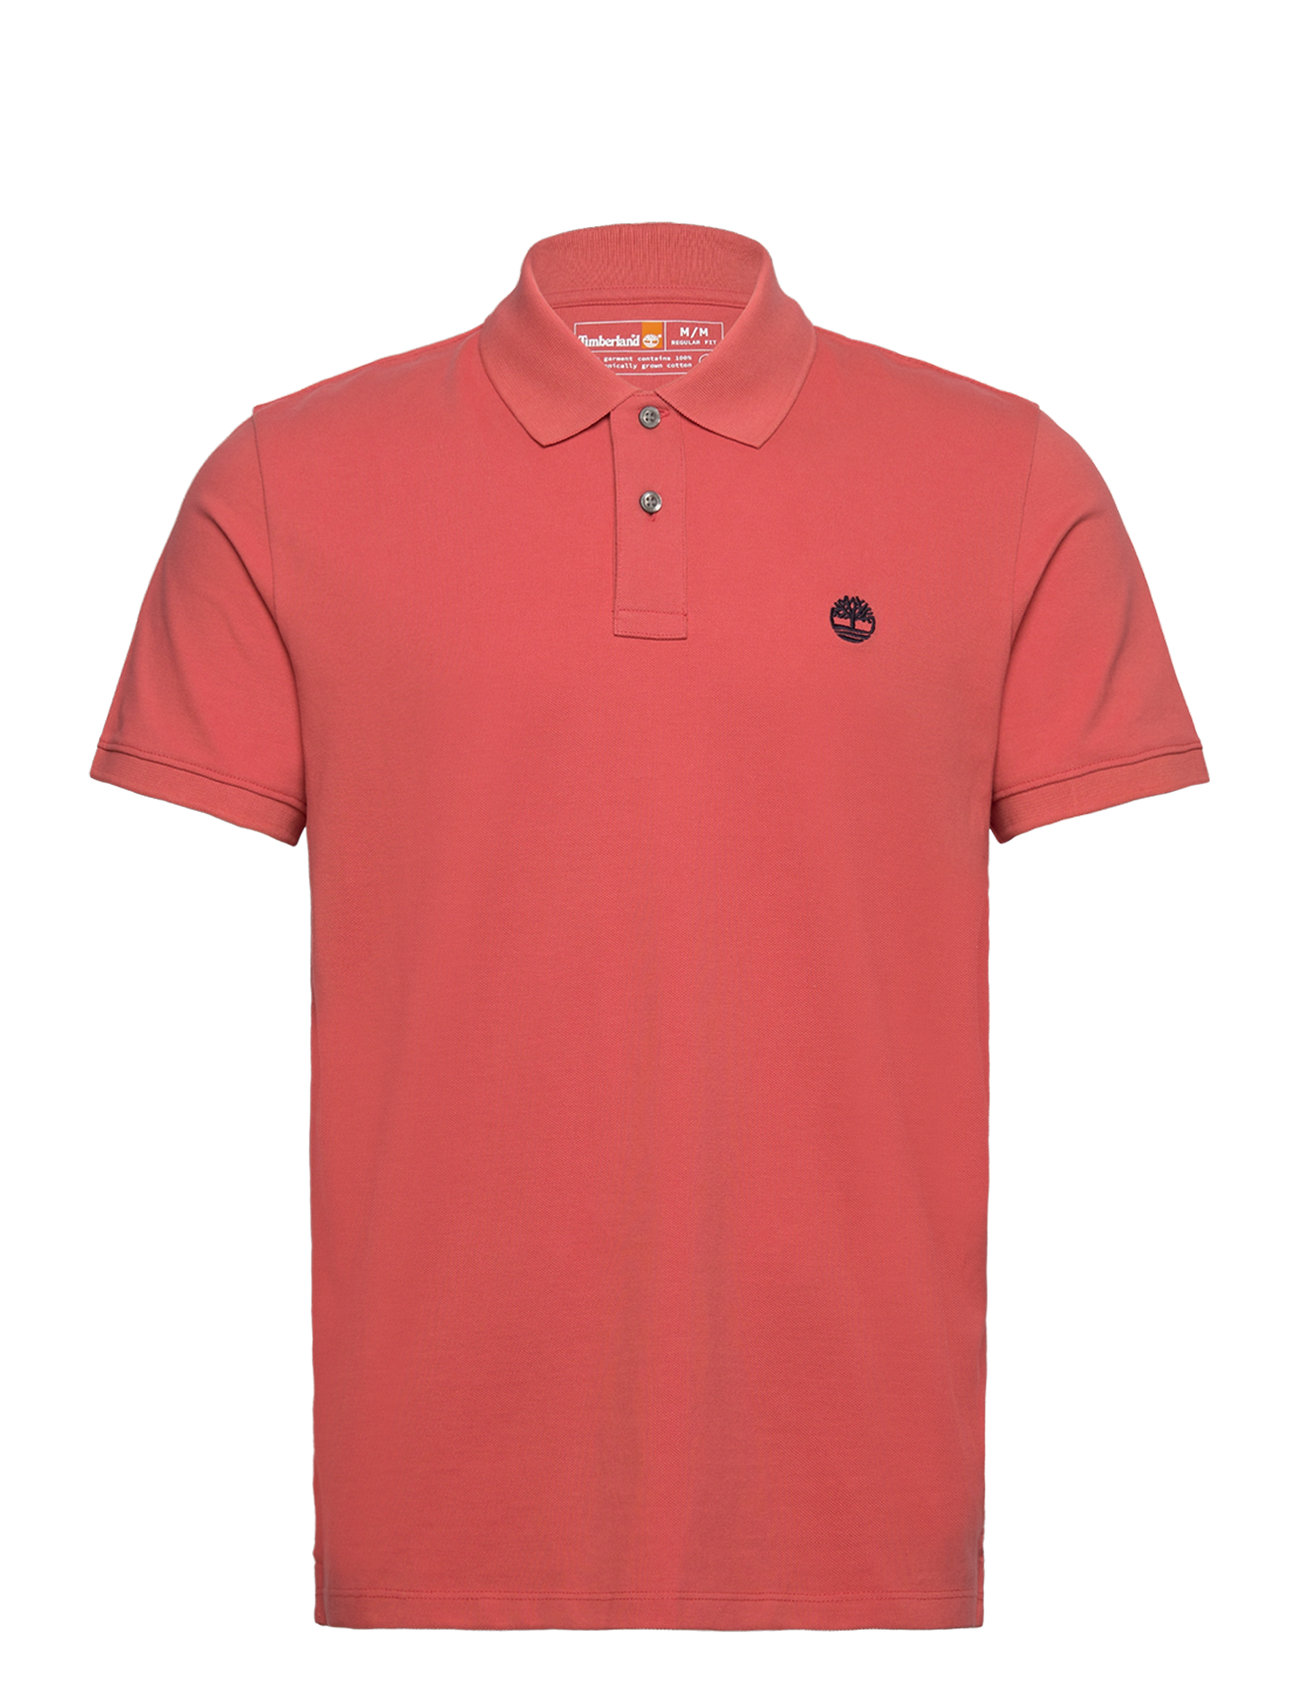 Millers River Pique Short Sleeve Polo Burnt Sienna-App Designers Polos Short-sleeved Red Timberland